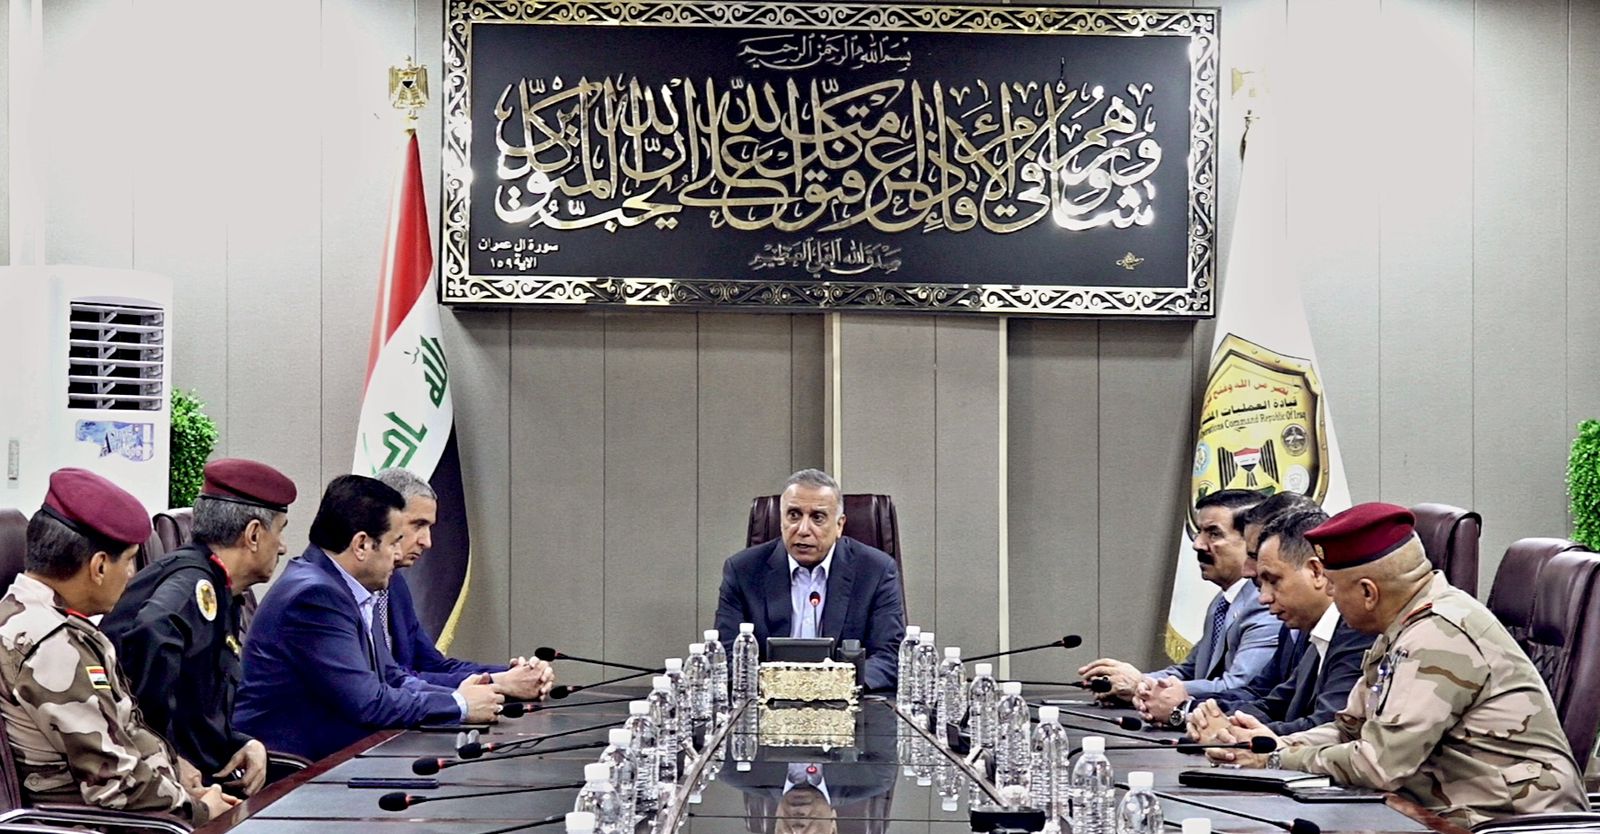 Al-Kadhimi heads a high-level security meeting to discuss the Green Zone protests